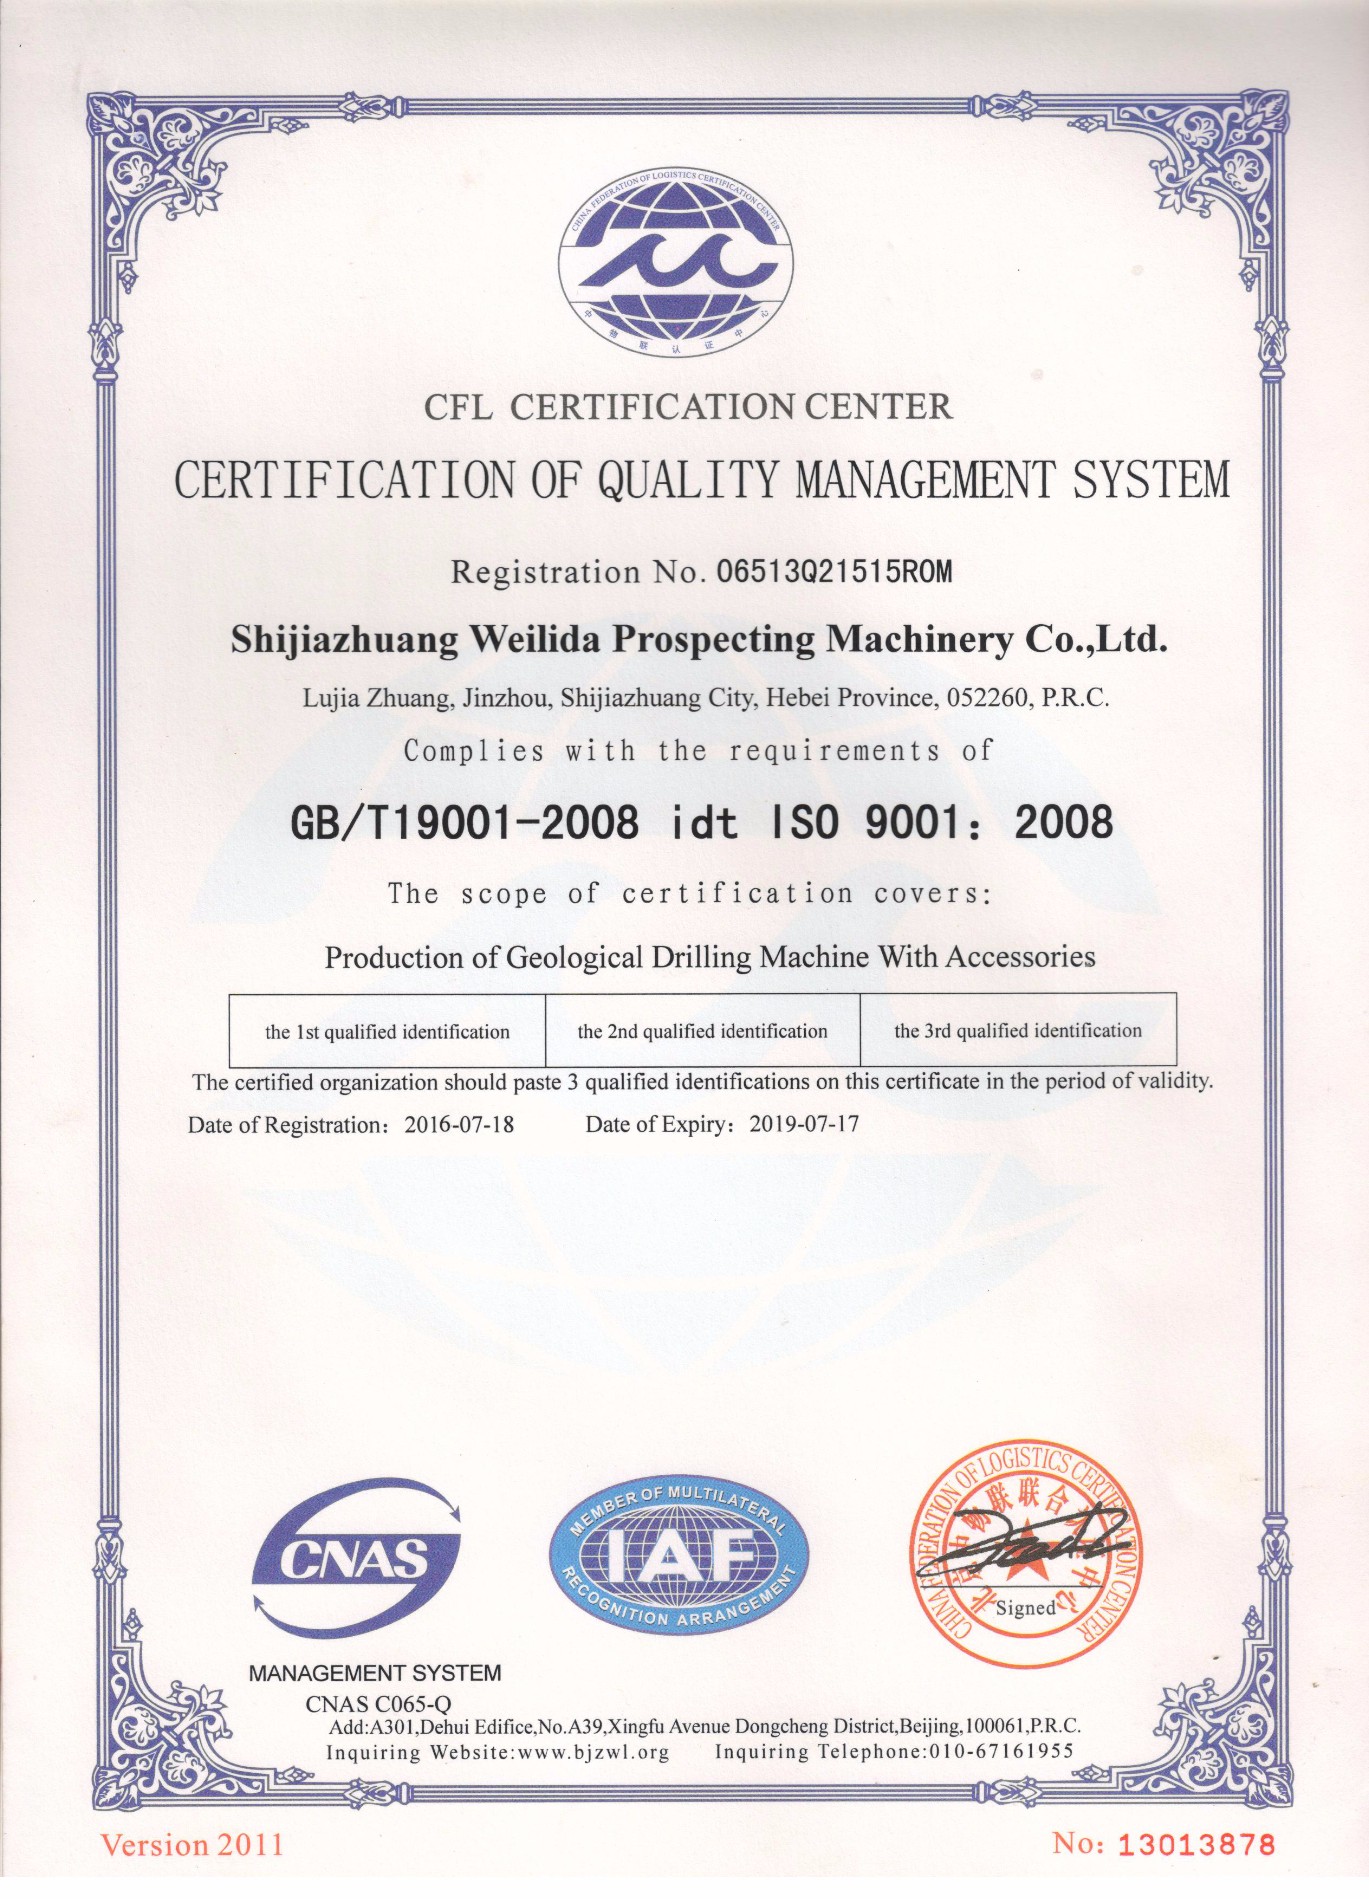 We Passed The Quality Management System Certificate